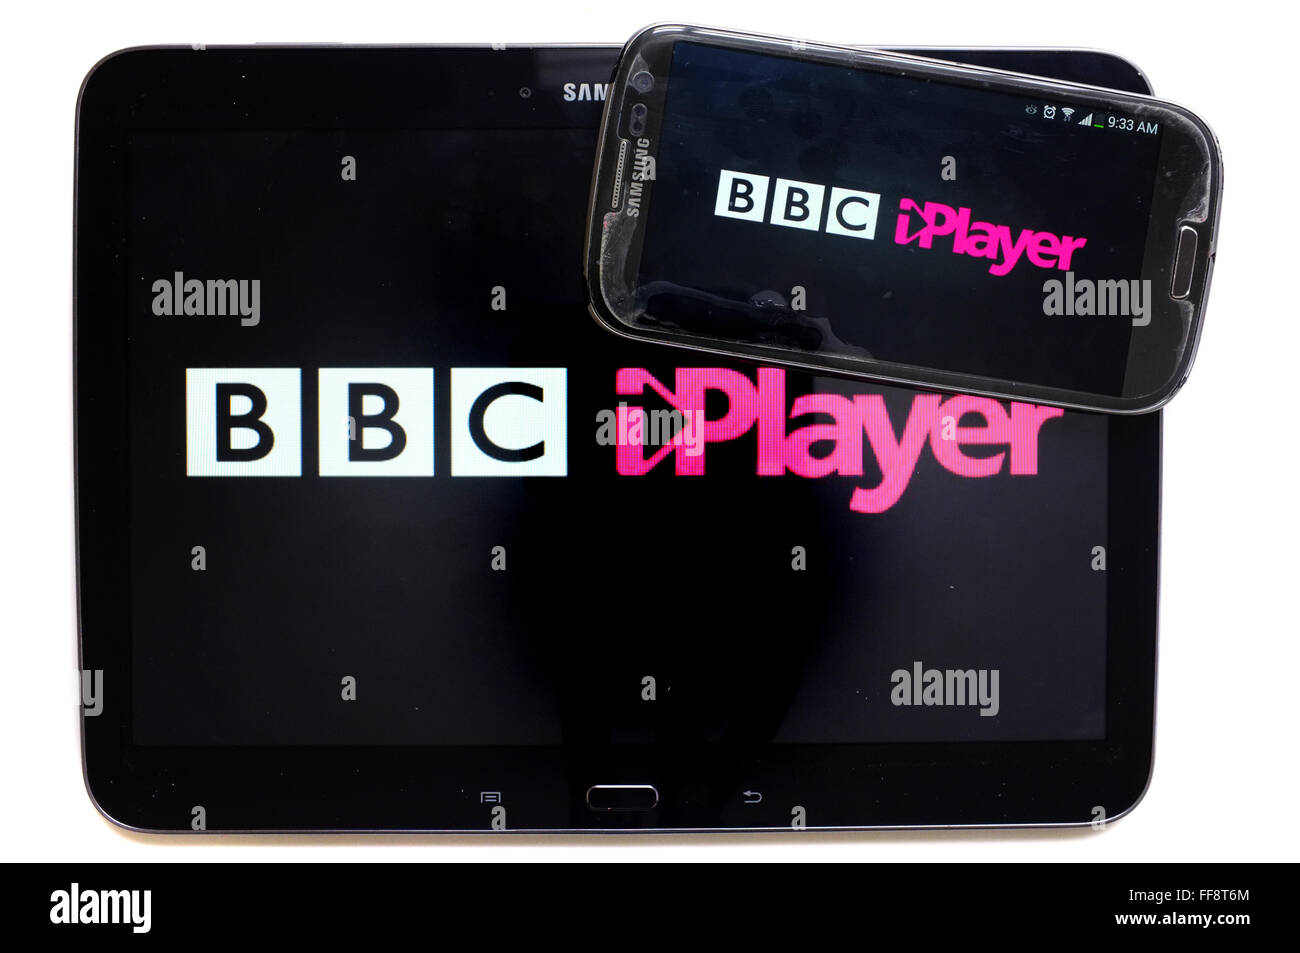 The BBC iPLayer logo on a smartphone screen and a tablet screen photographed against a white background. Stock Photo